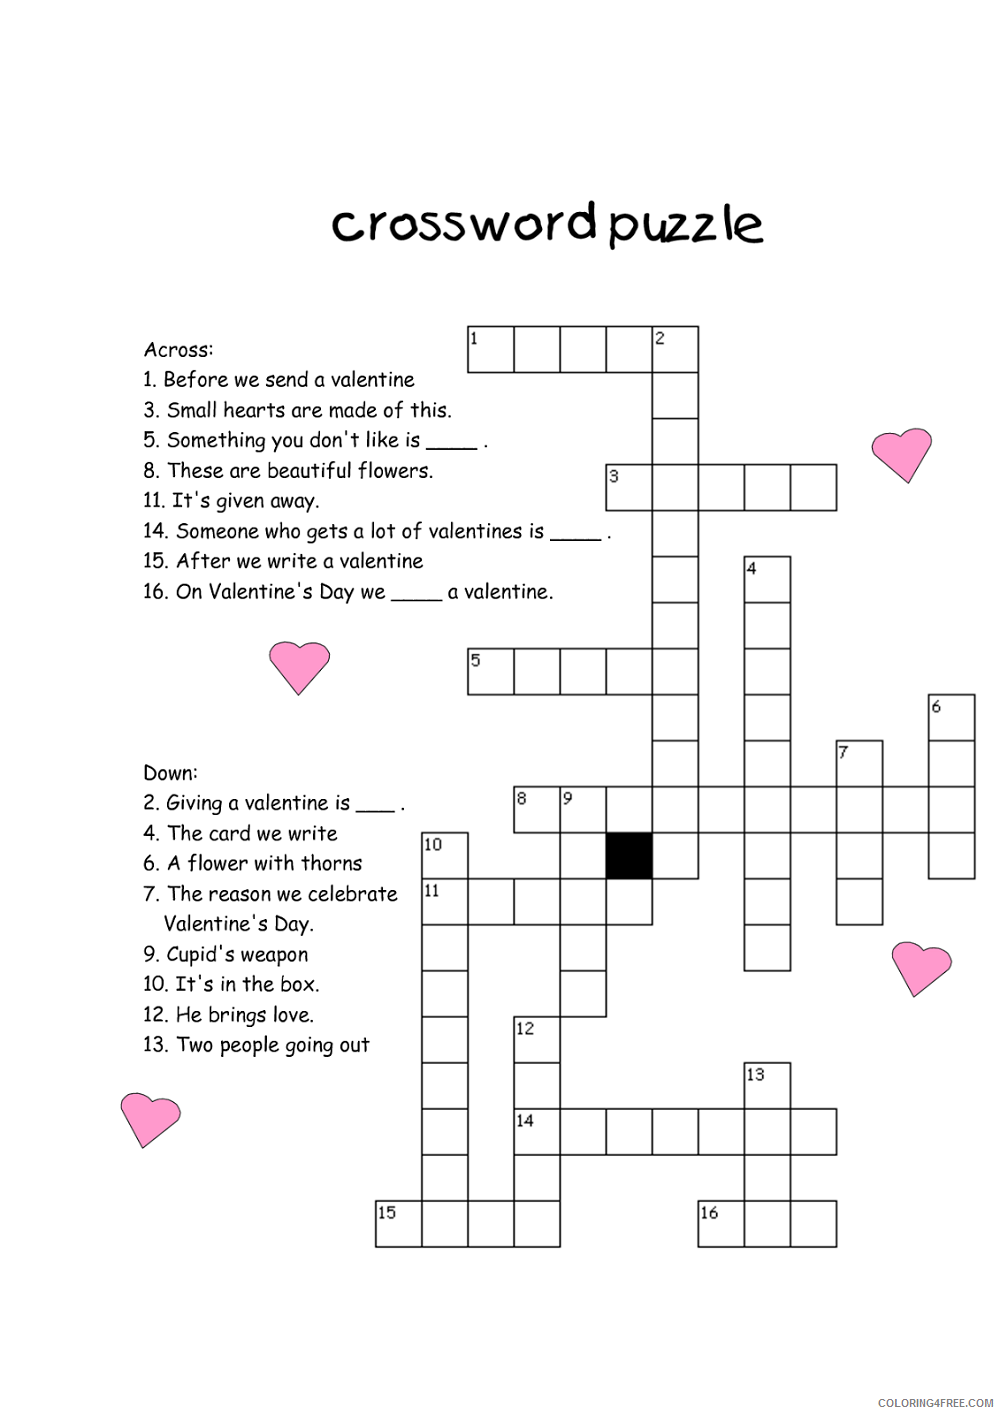 Crossword Puzzle Coloring Pages Free Crossword Puzzles For Kids Printable 2021 Coloring4free